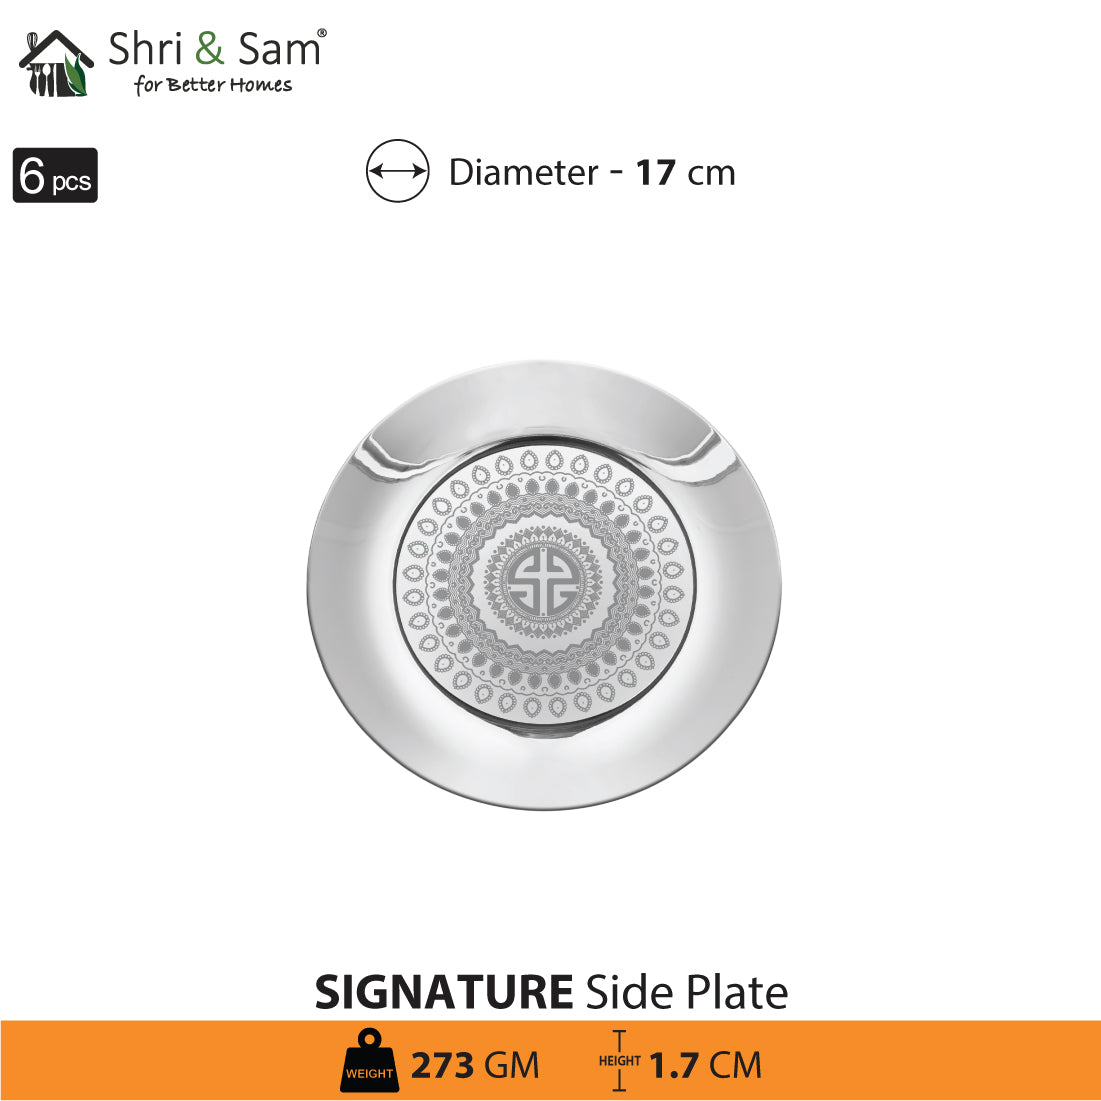 Stainless Steel 6 PCS Side Plate with Laser Signature - Shiny